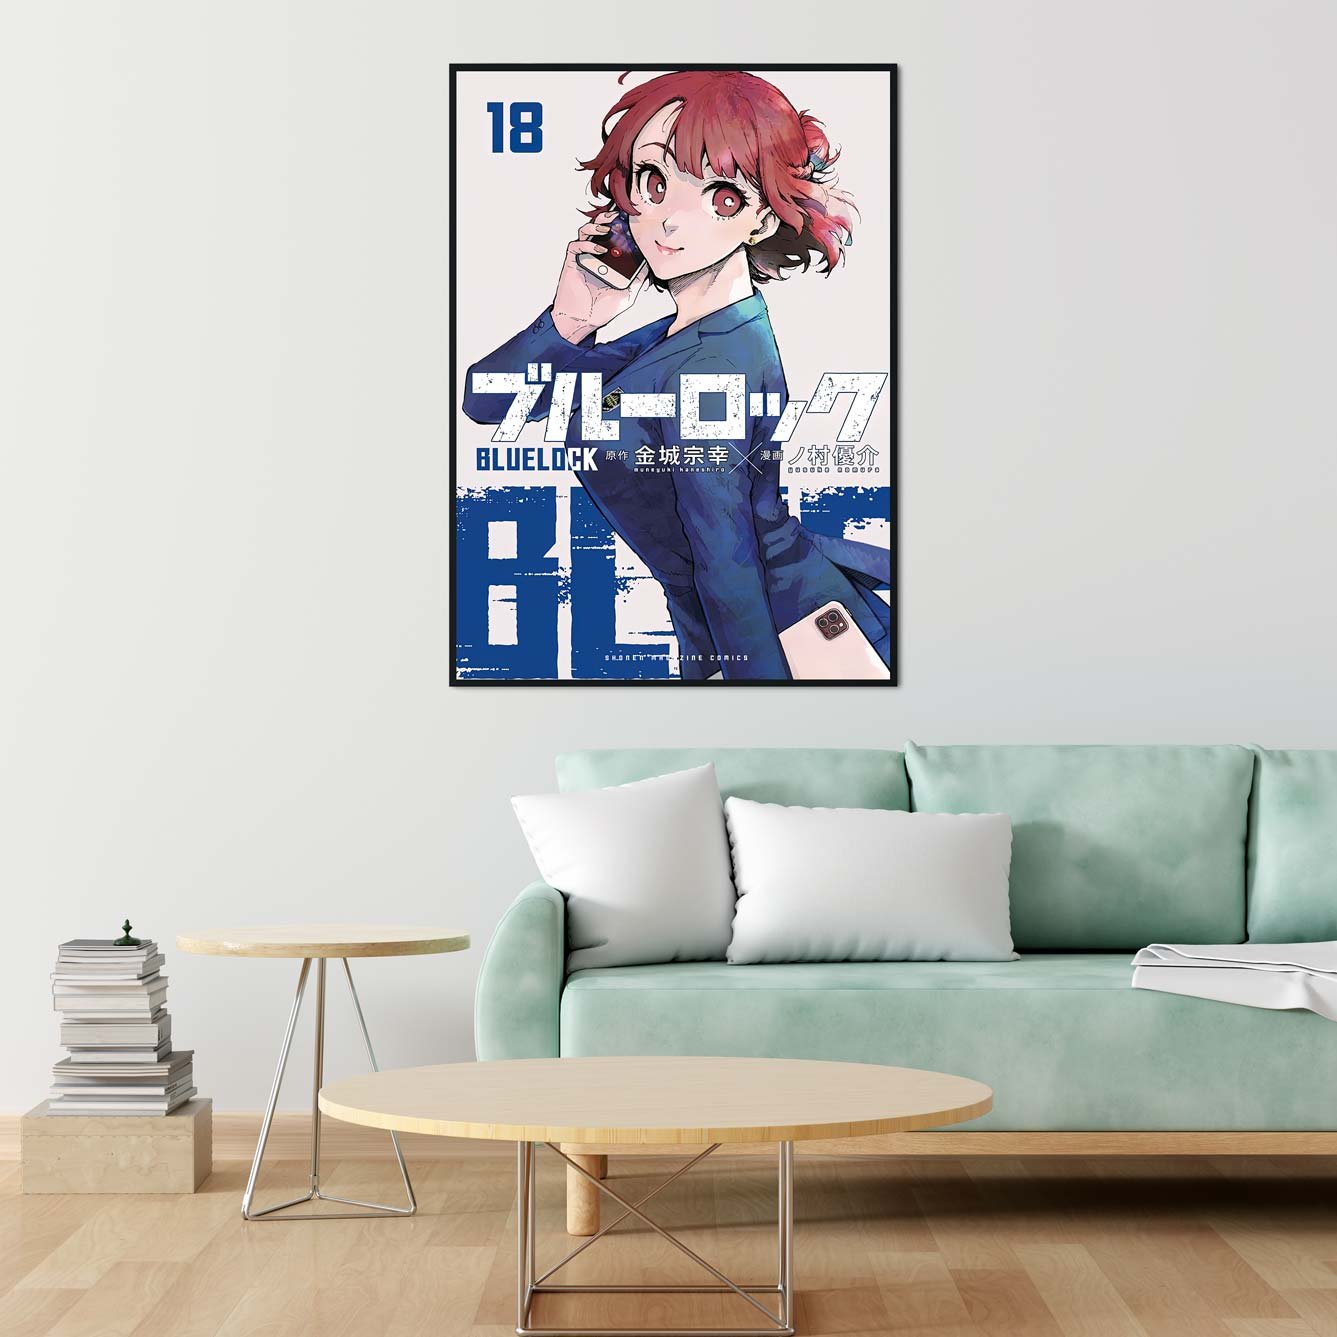 MiodiyaArt Blue Lock Poster 8 Pcs 16.5 x 11.5 inch Anime Wall Decor Anime  Merch Art Prints HD Posters for Fans